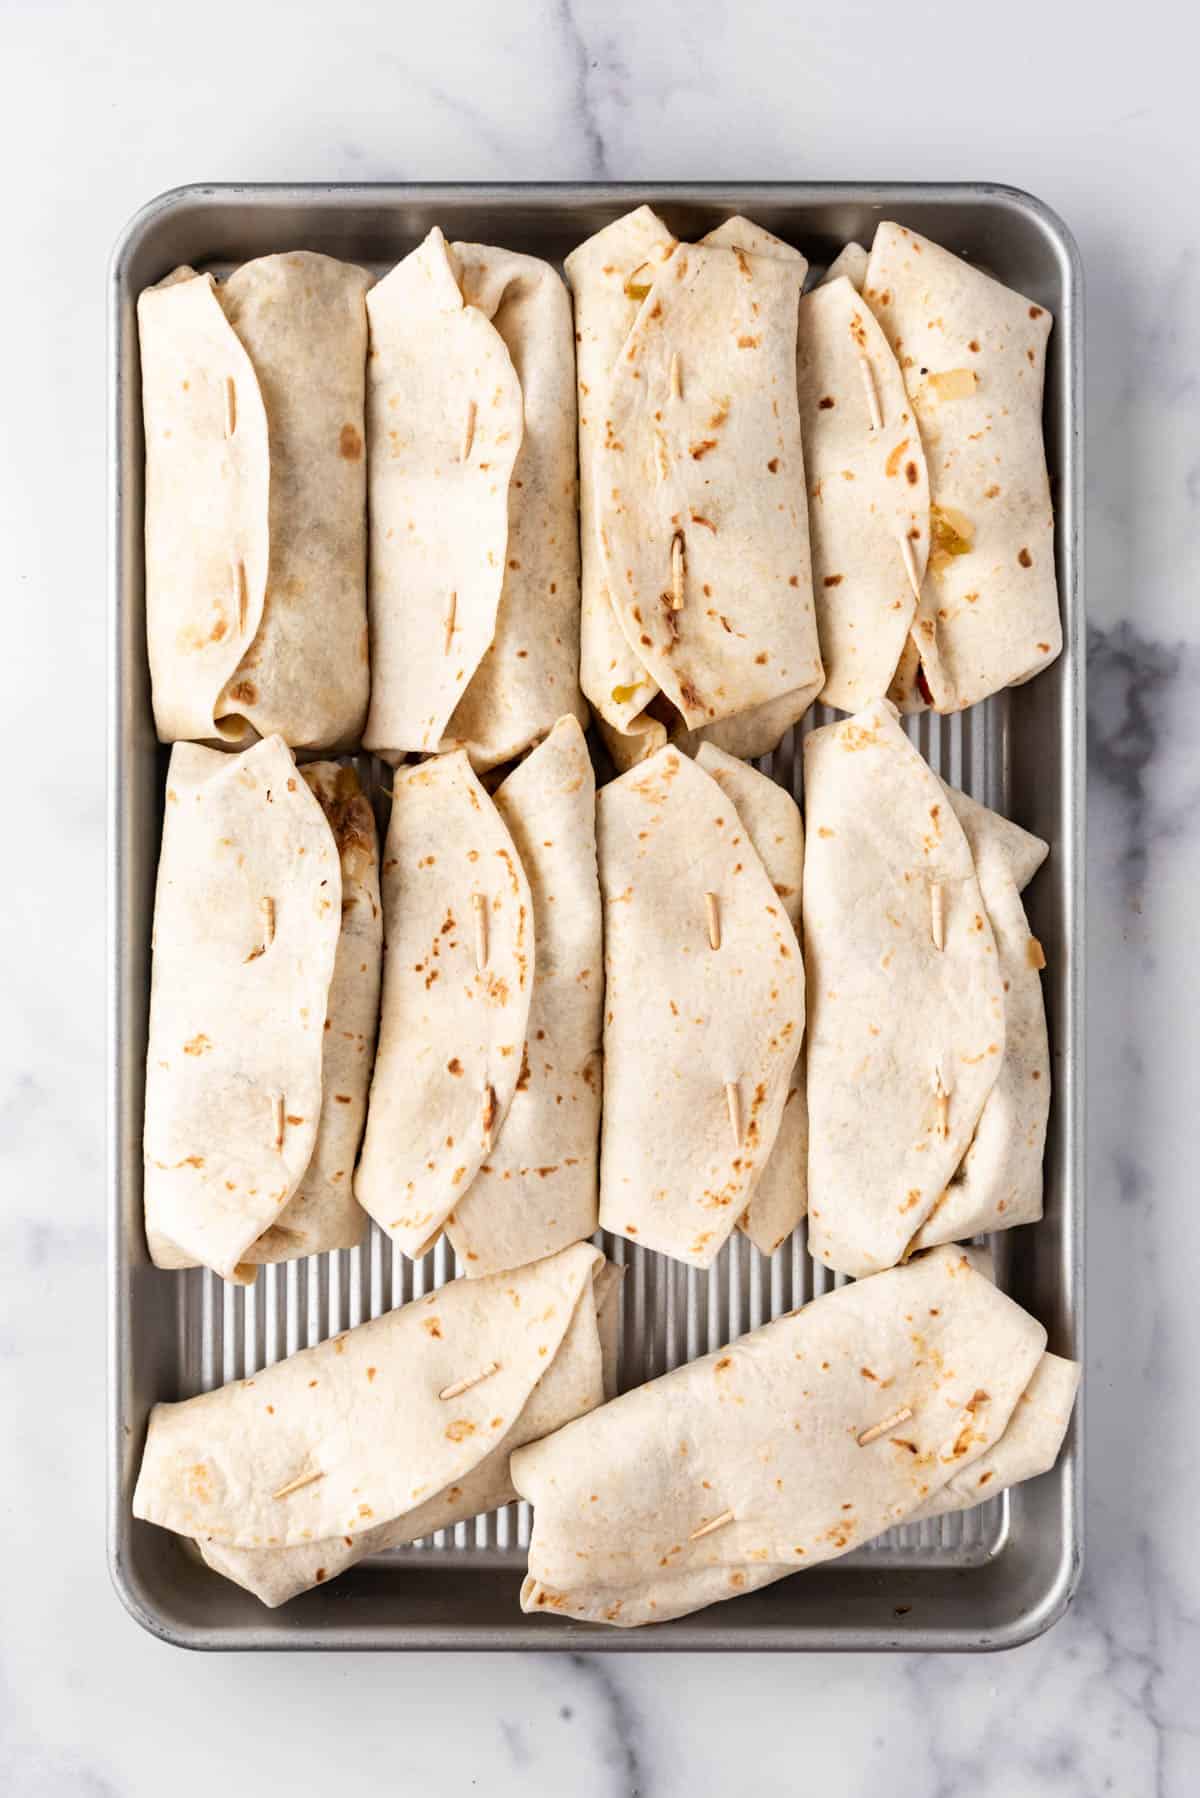 An overhead image of assembled chimichangas on a baking sheet before frying.